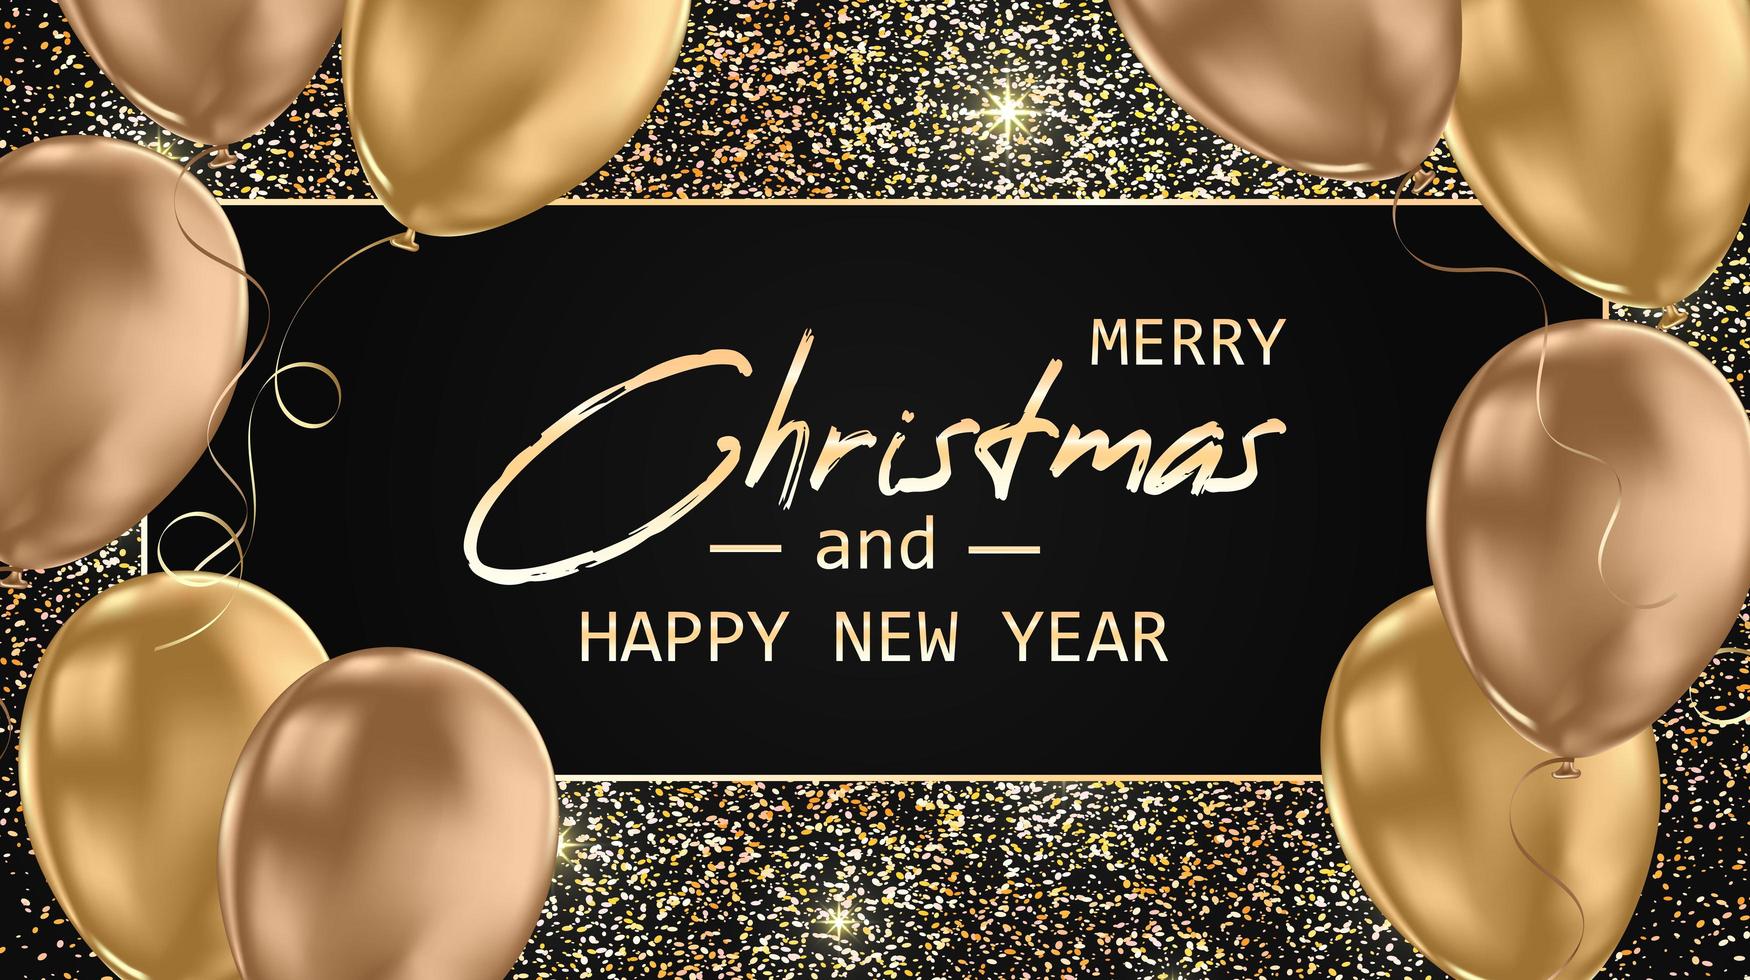 Marry Christmas and Happy New Year card. Christmas banner. vector